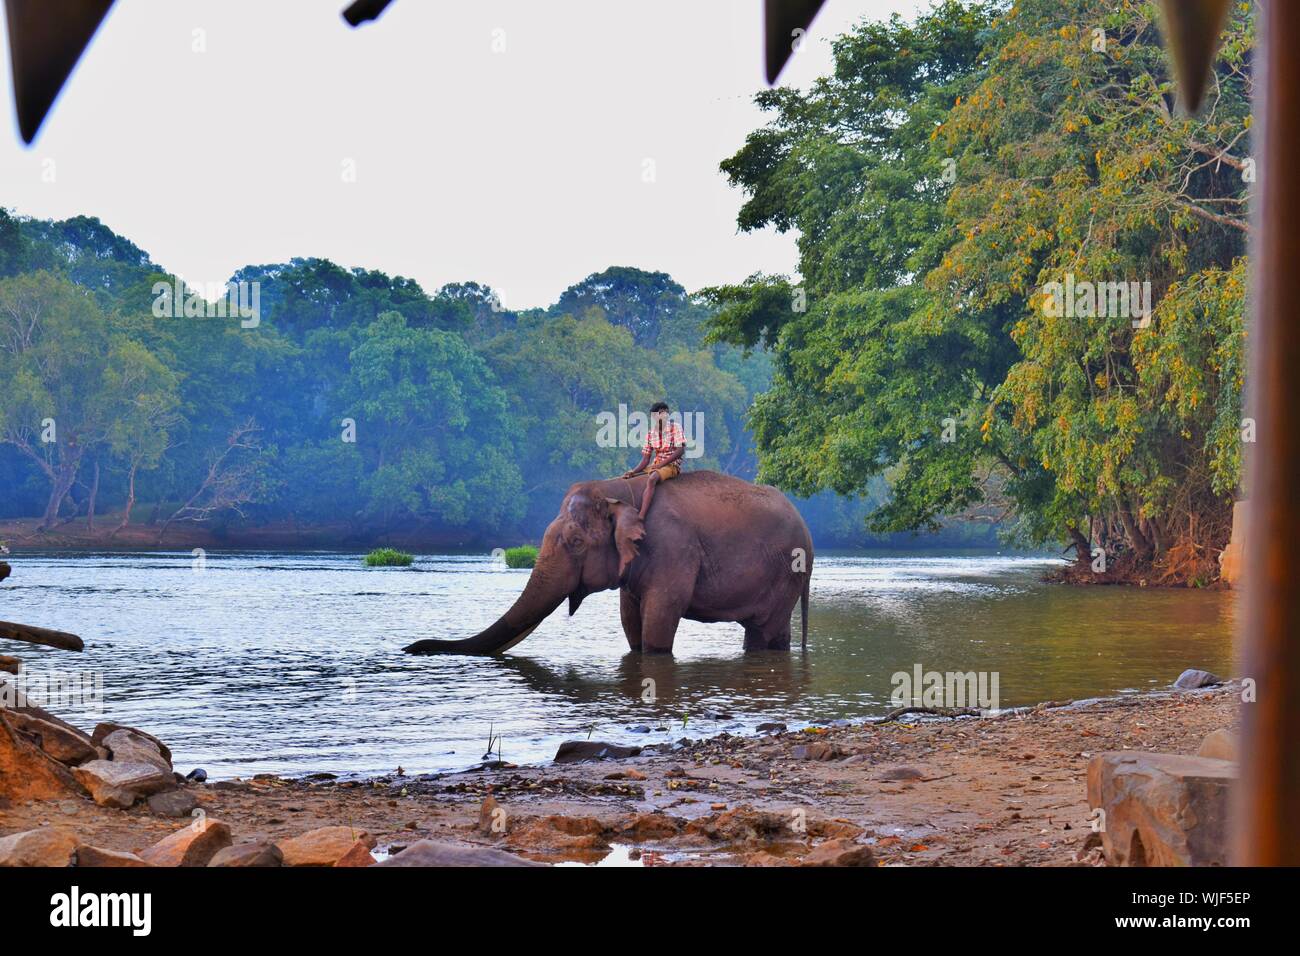 Man Riding Elephant Water High Resolution Stock Photography And Images Alamy